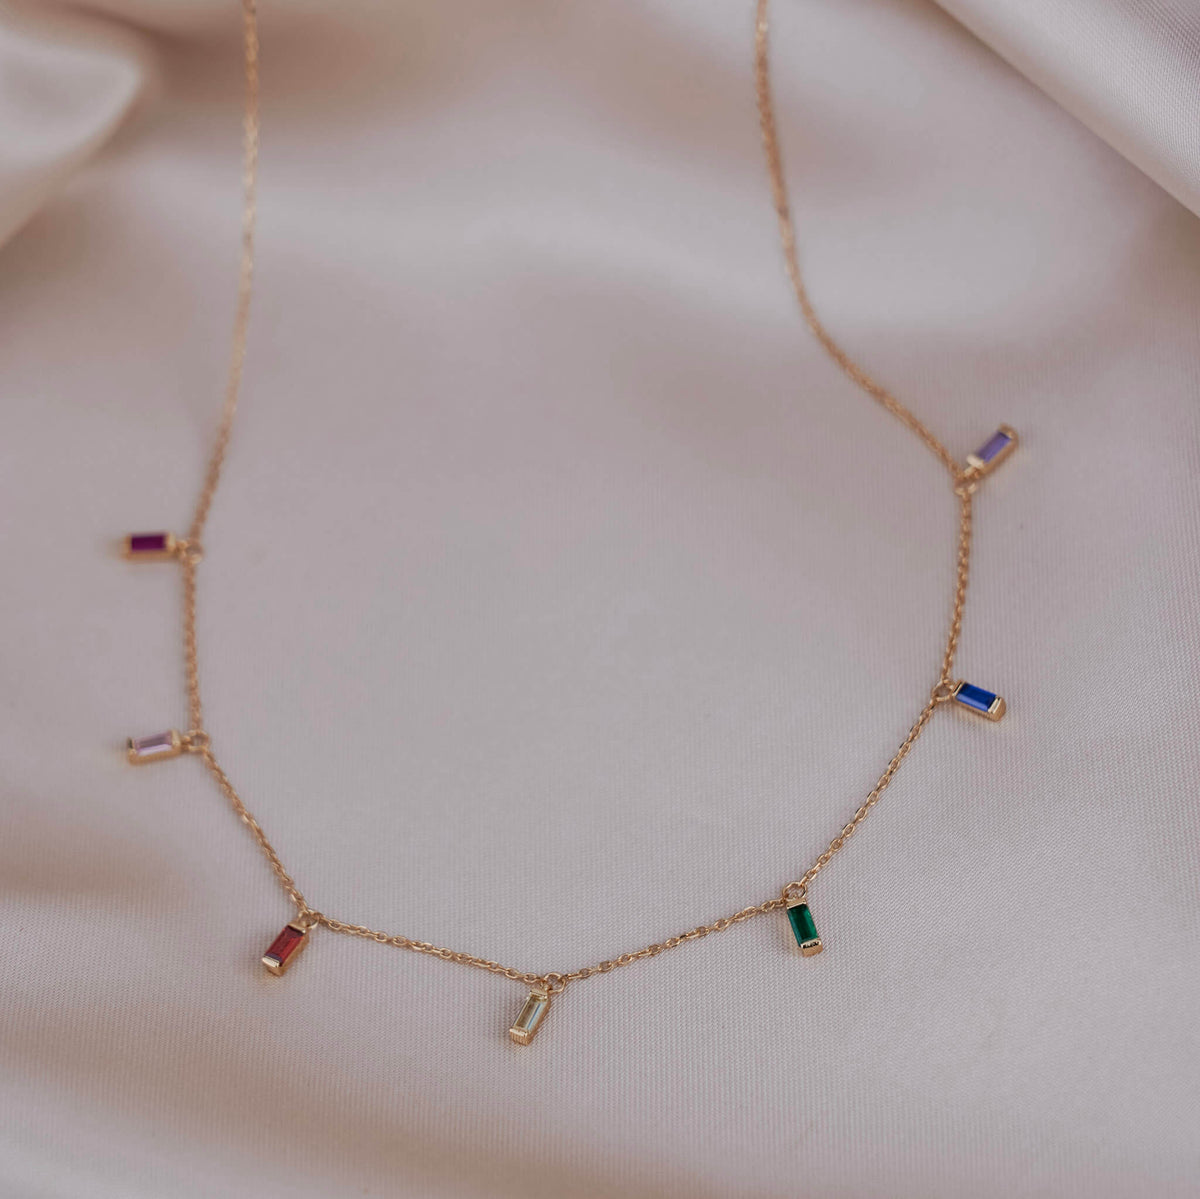 Chakra necklaces are beneficial for physical, mental, and spiritual well-being. They help balance the imbalanced chakras and help to open blocked chakras. This chakra necklace is colourful and photographed on silk.